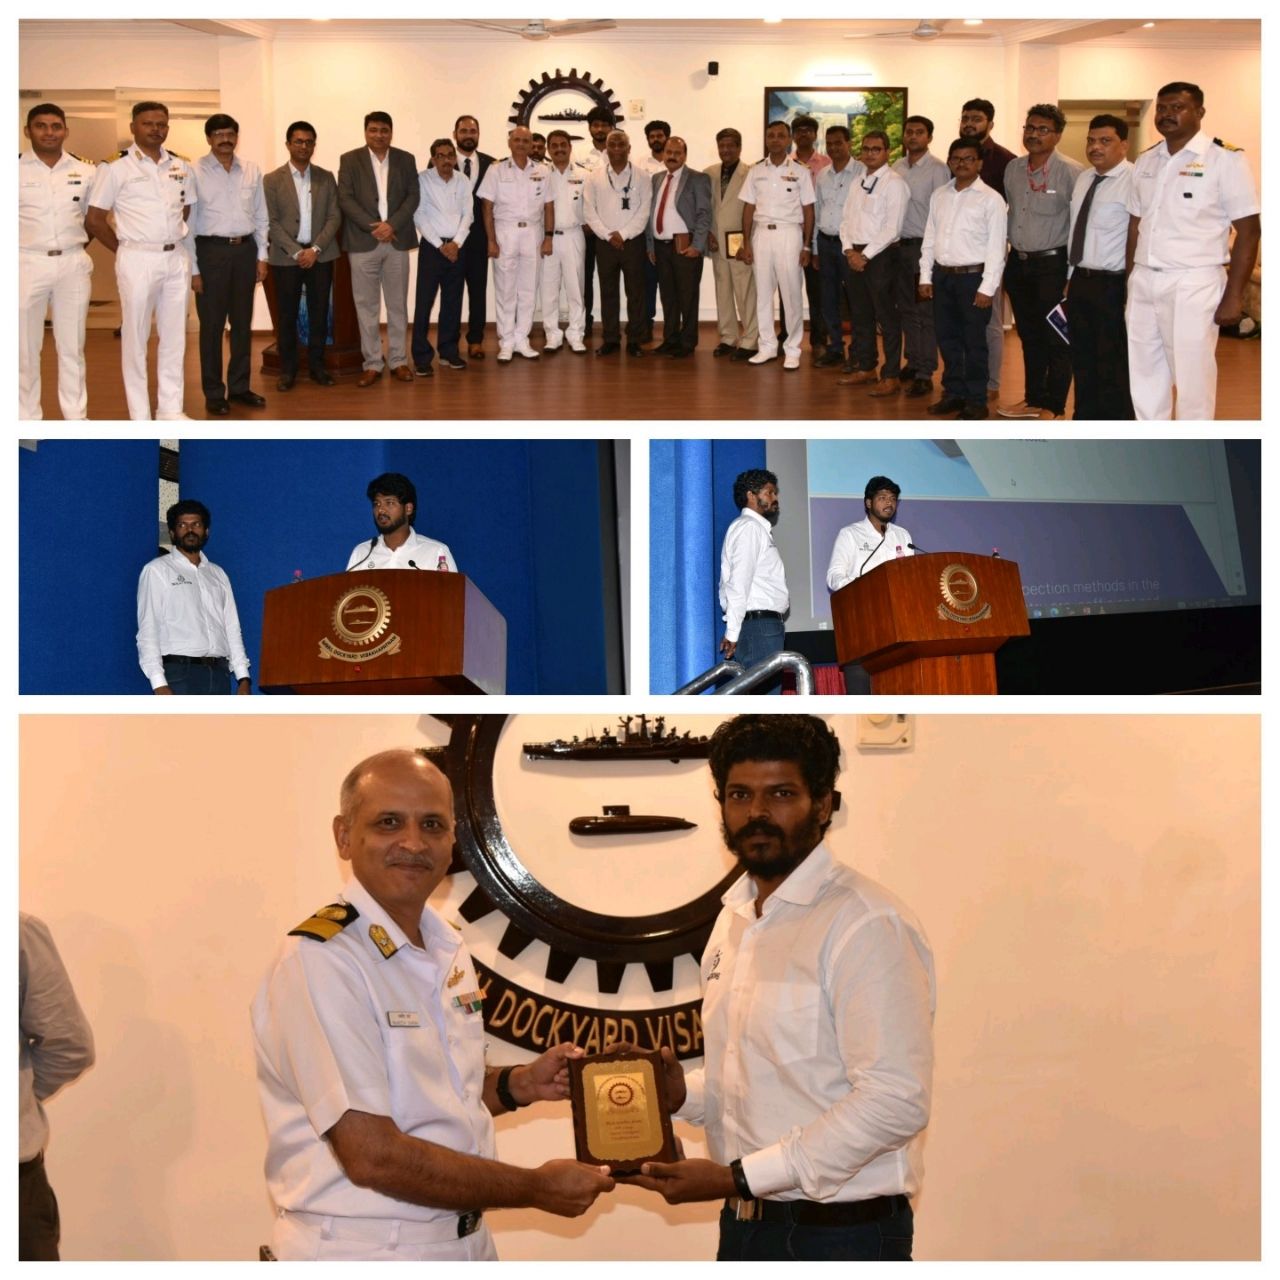 Thank you Naval Dockyard for inviting us to present a paper about Advance Inspection Technologies in Maritime Industry.